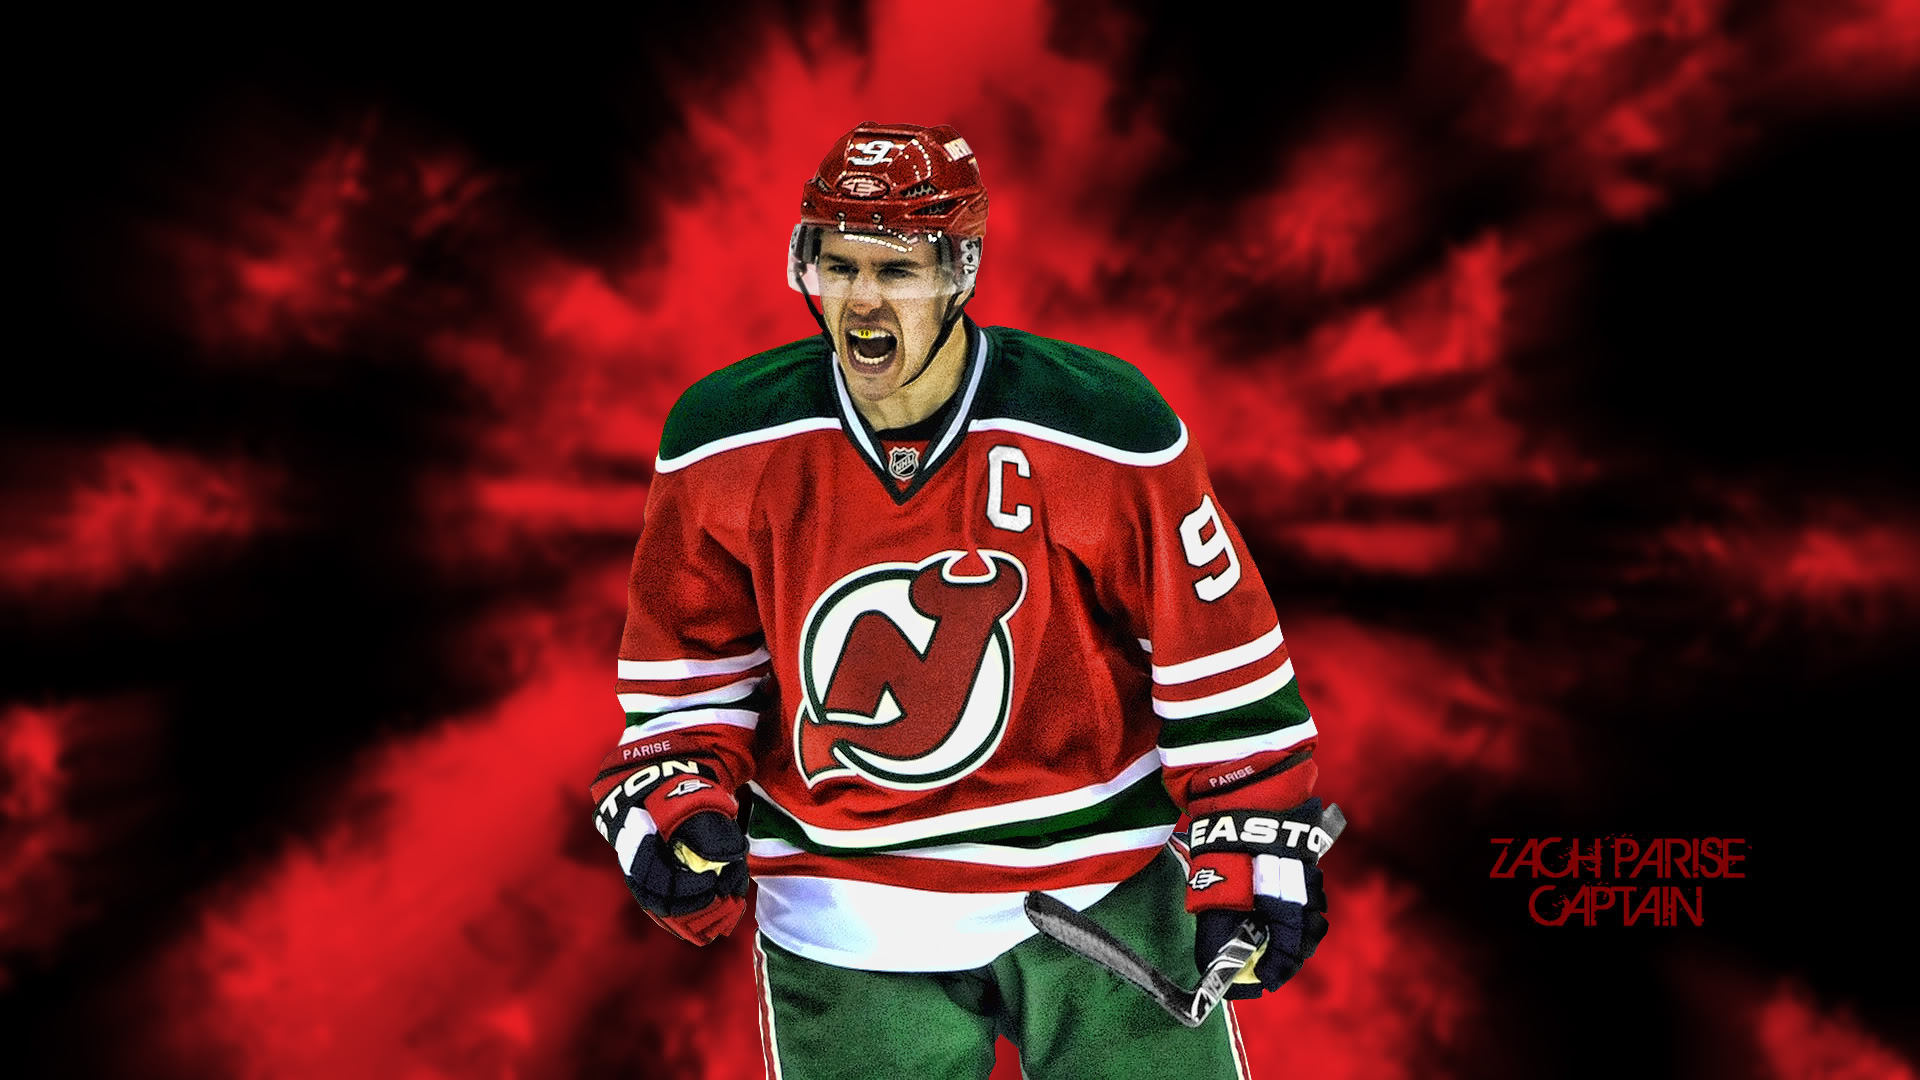 Best Hockey player Minnesota Zach Parise wallpapers and images